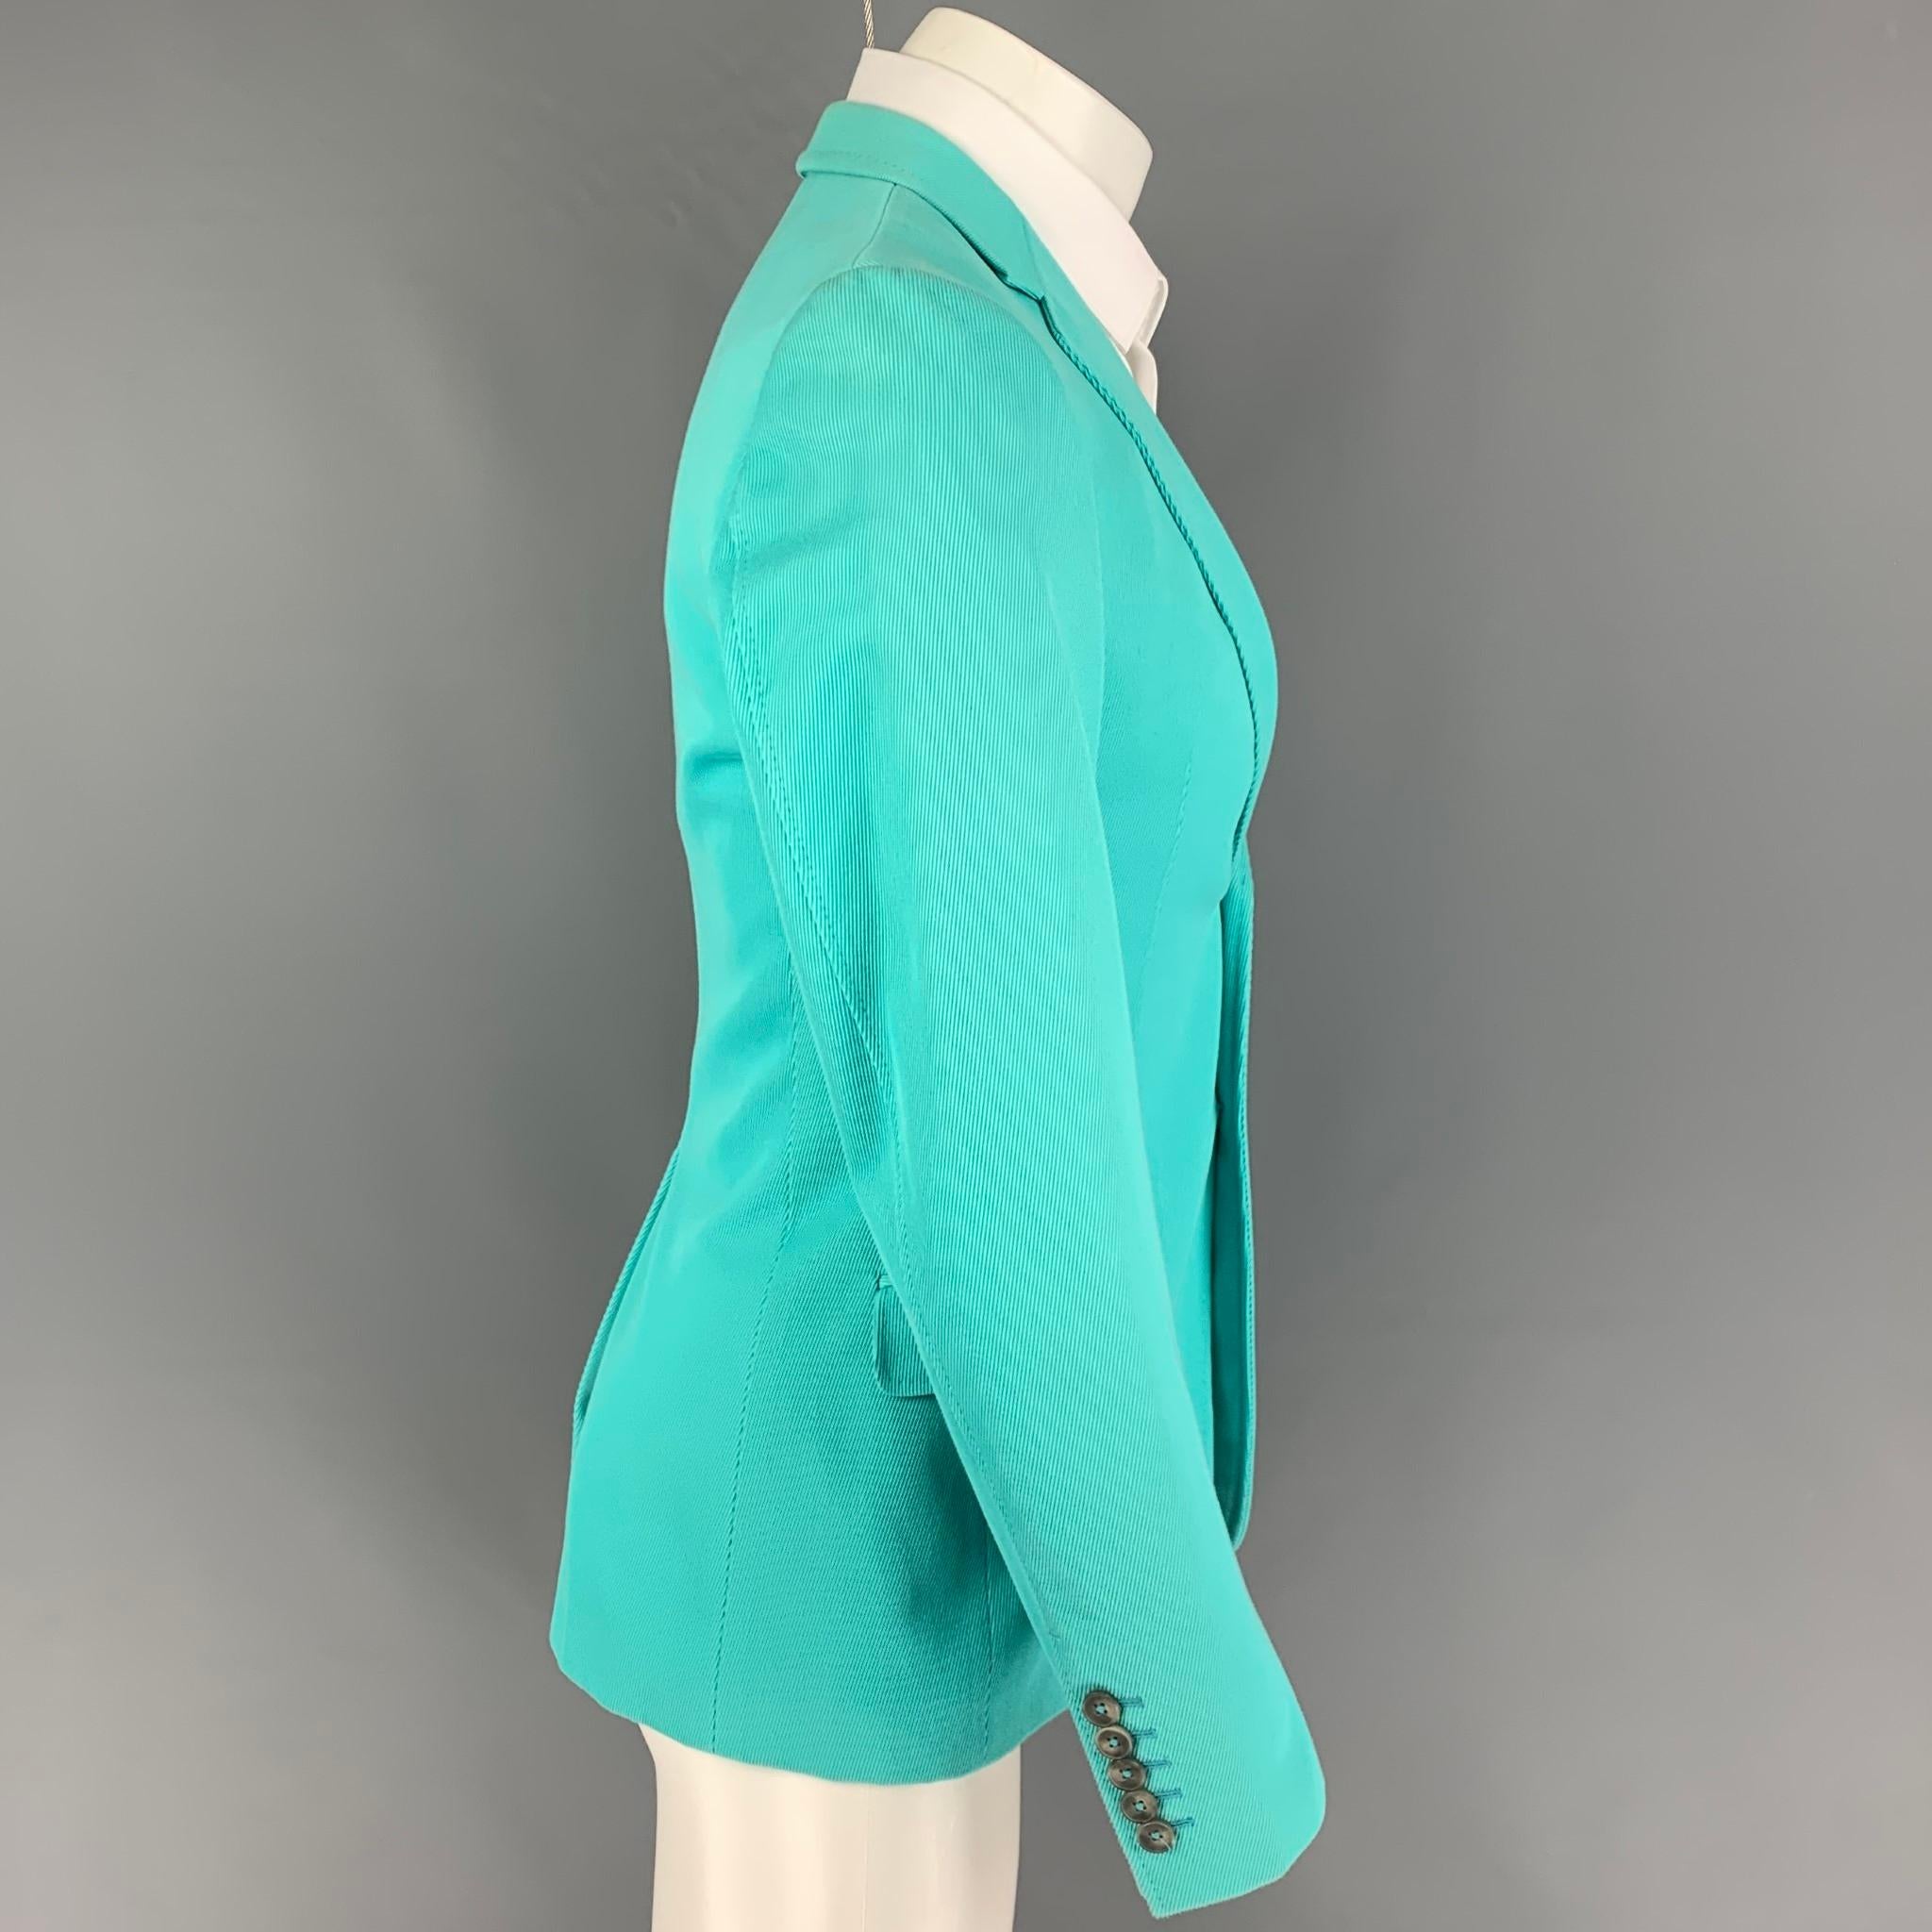 GUCCI by Tom Ford sport coat comes in a aqua textured cotton with a full liner featuring a notch lapel, flap pockets, single back vent, and a double button closure. Made in Italy. 

Very Good Pre-Owned Condition. Light discoloration at